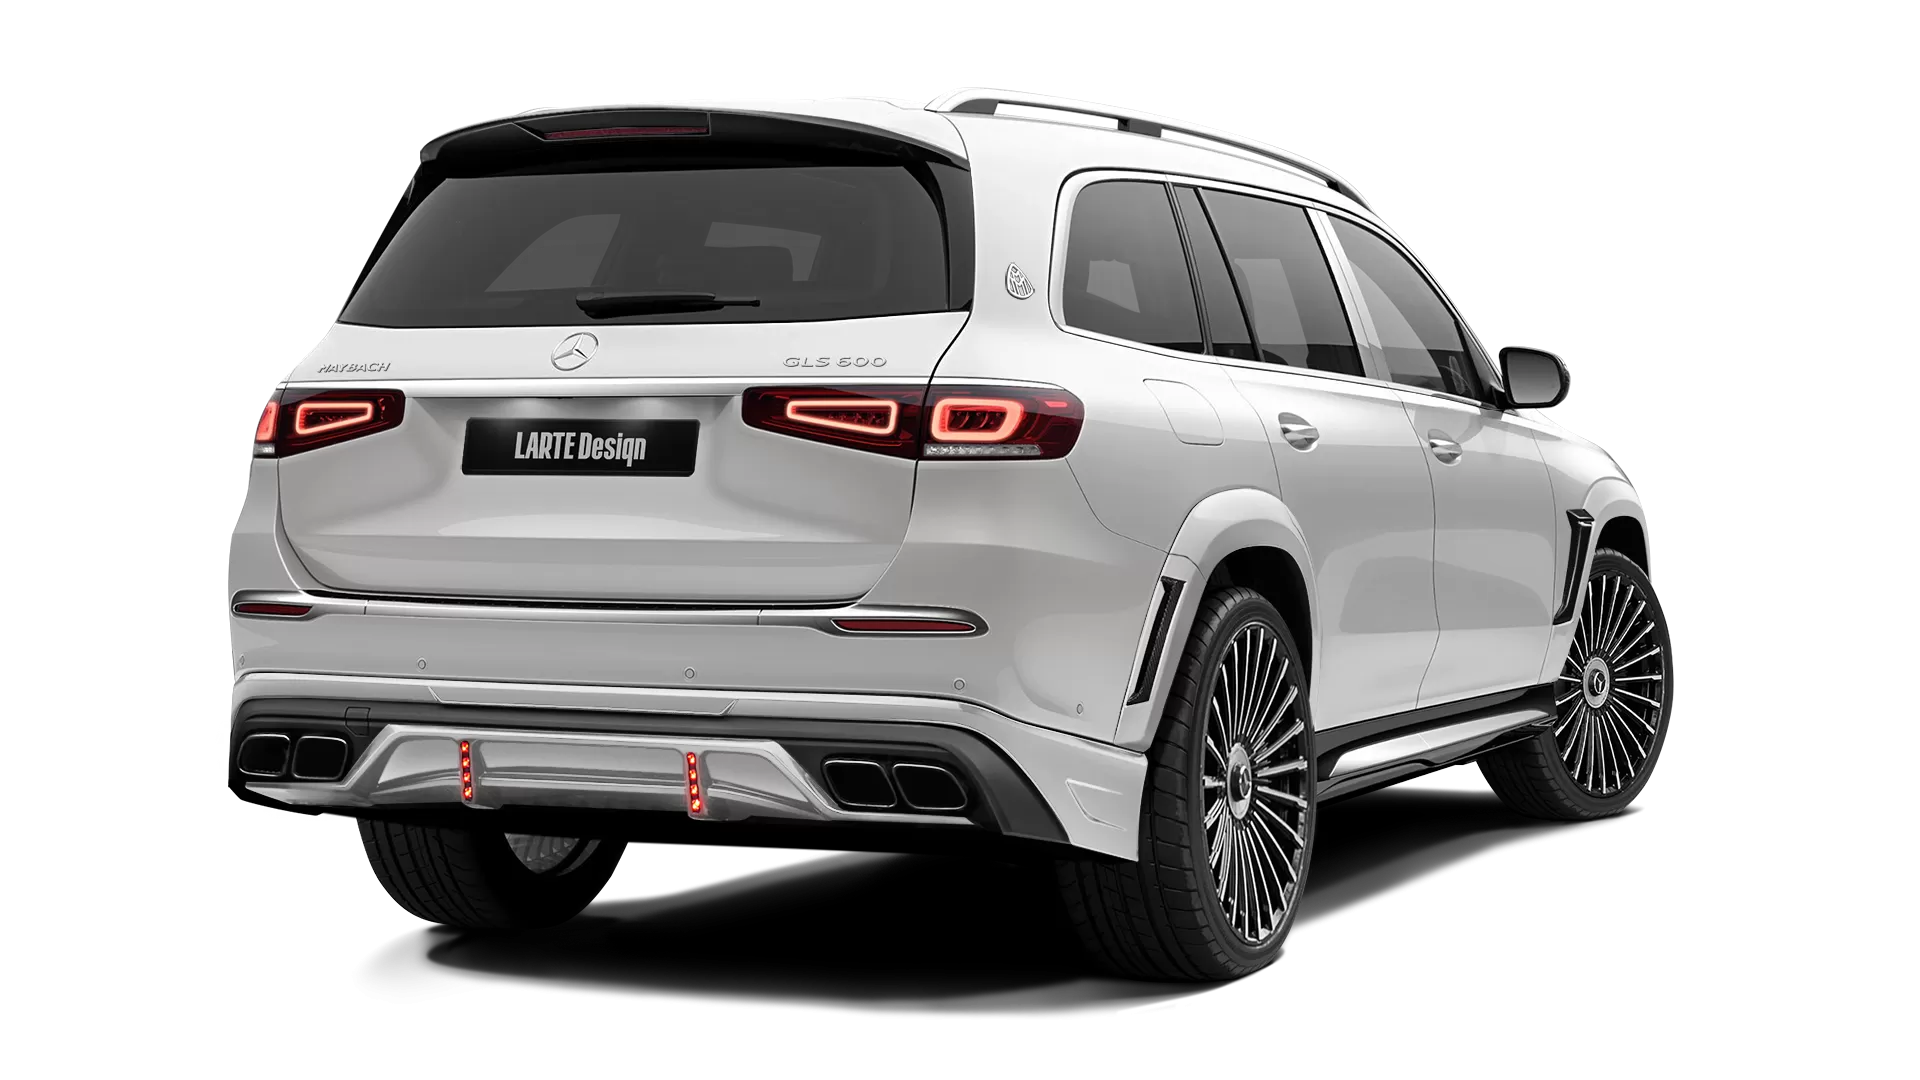 Mercedes Maybach GLS 600 with painted body kit: rear view shown in Diamond White